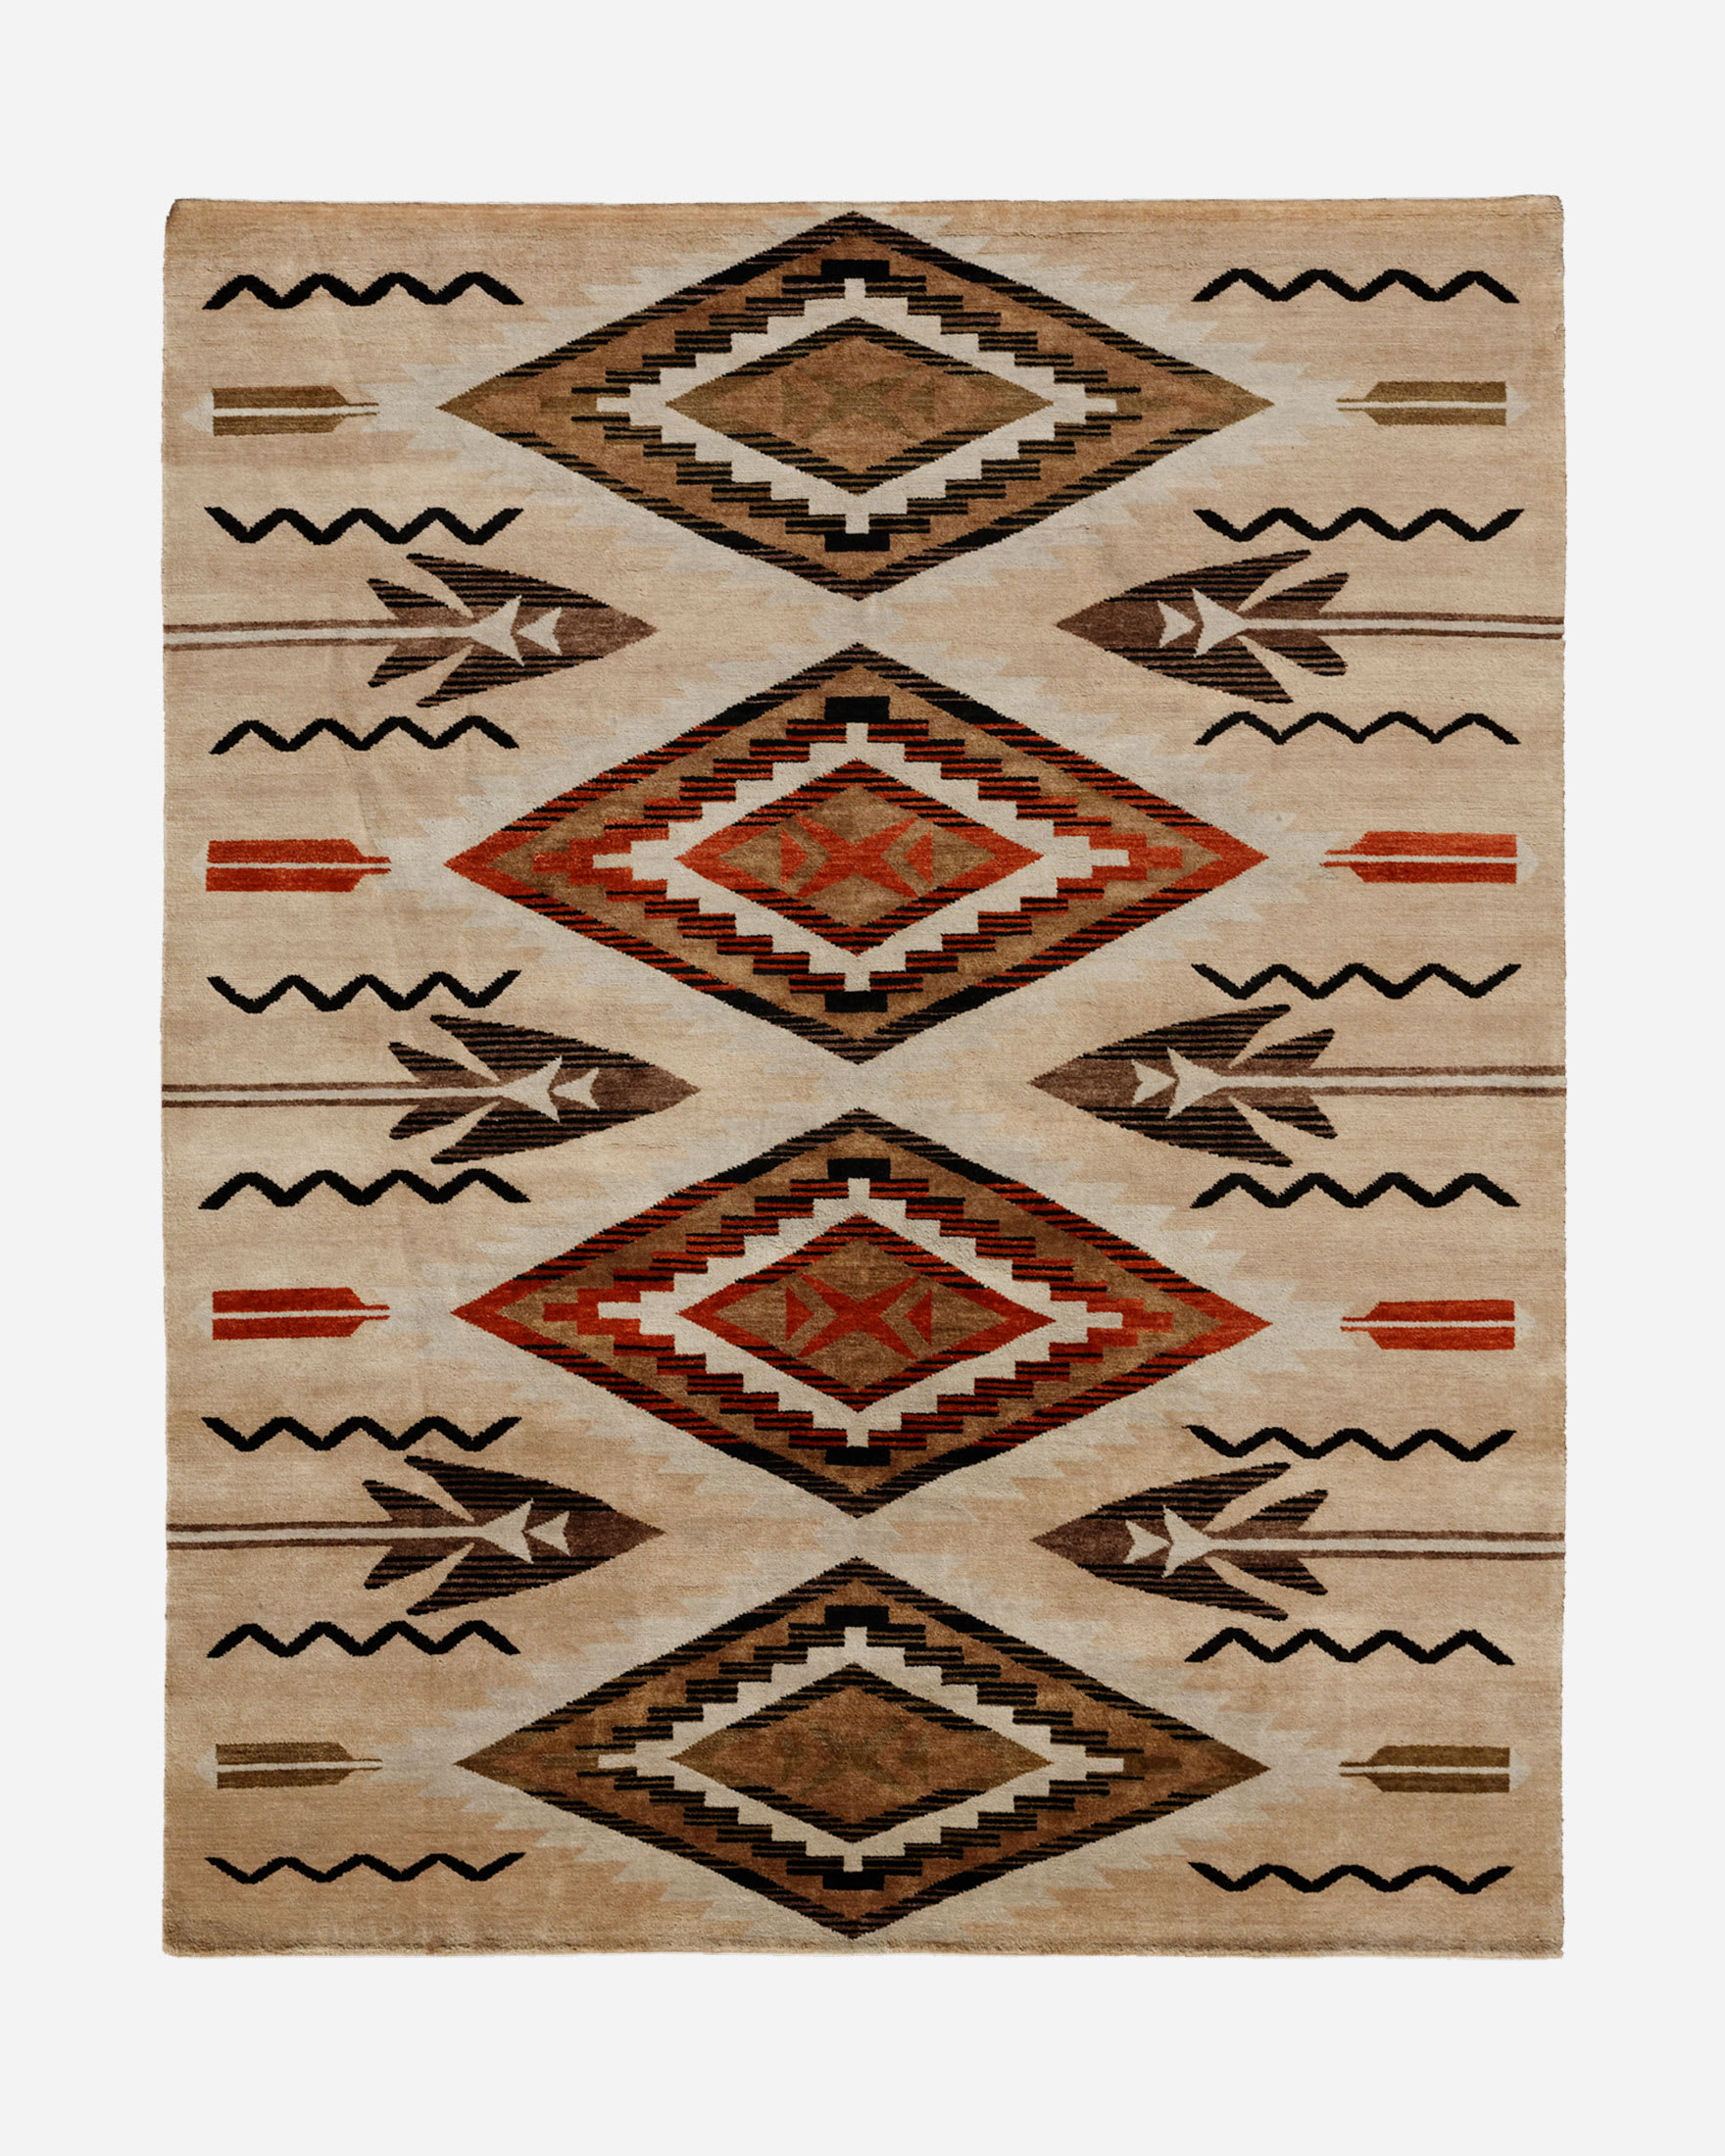 FATHER'S EYES RUG